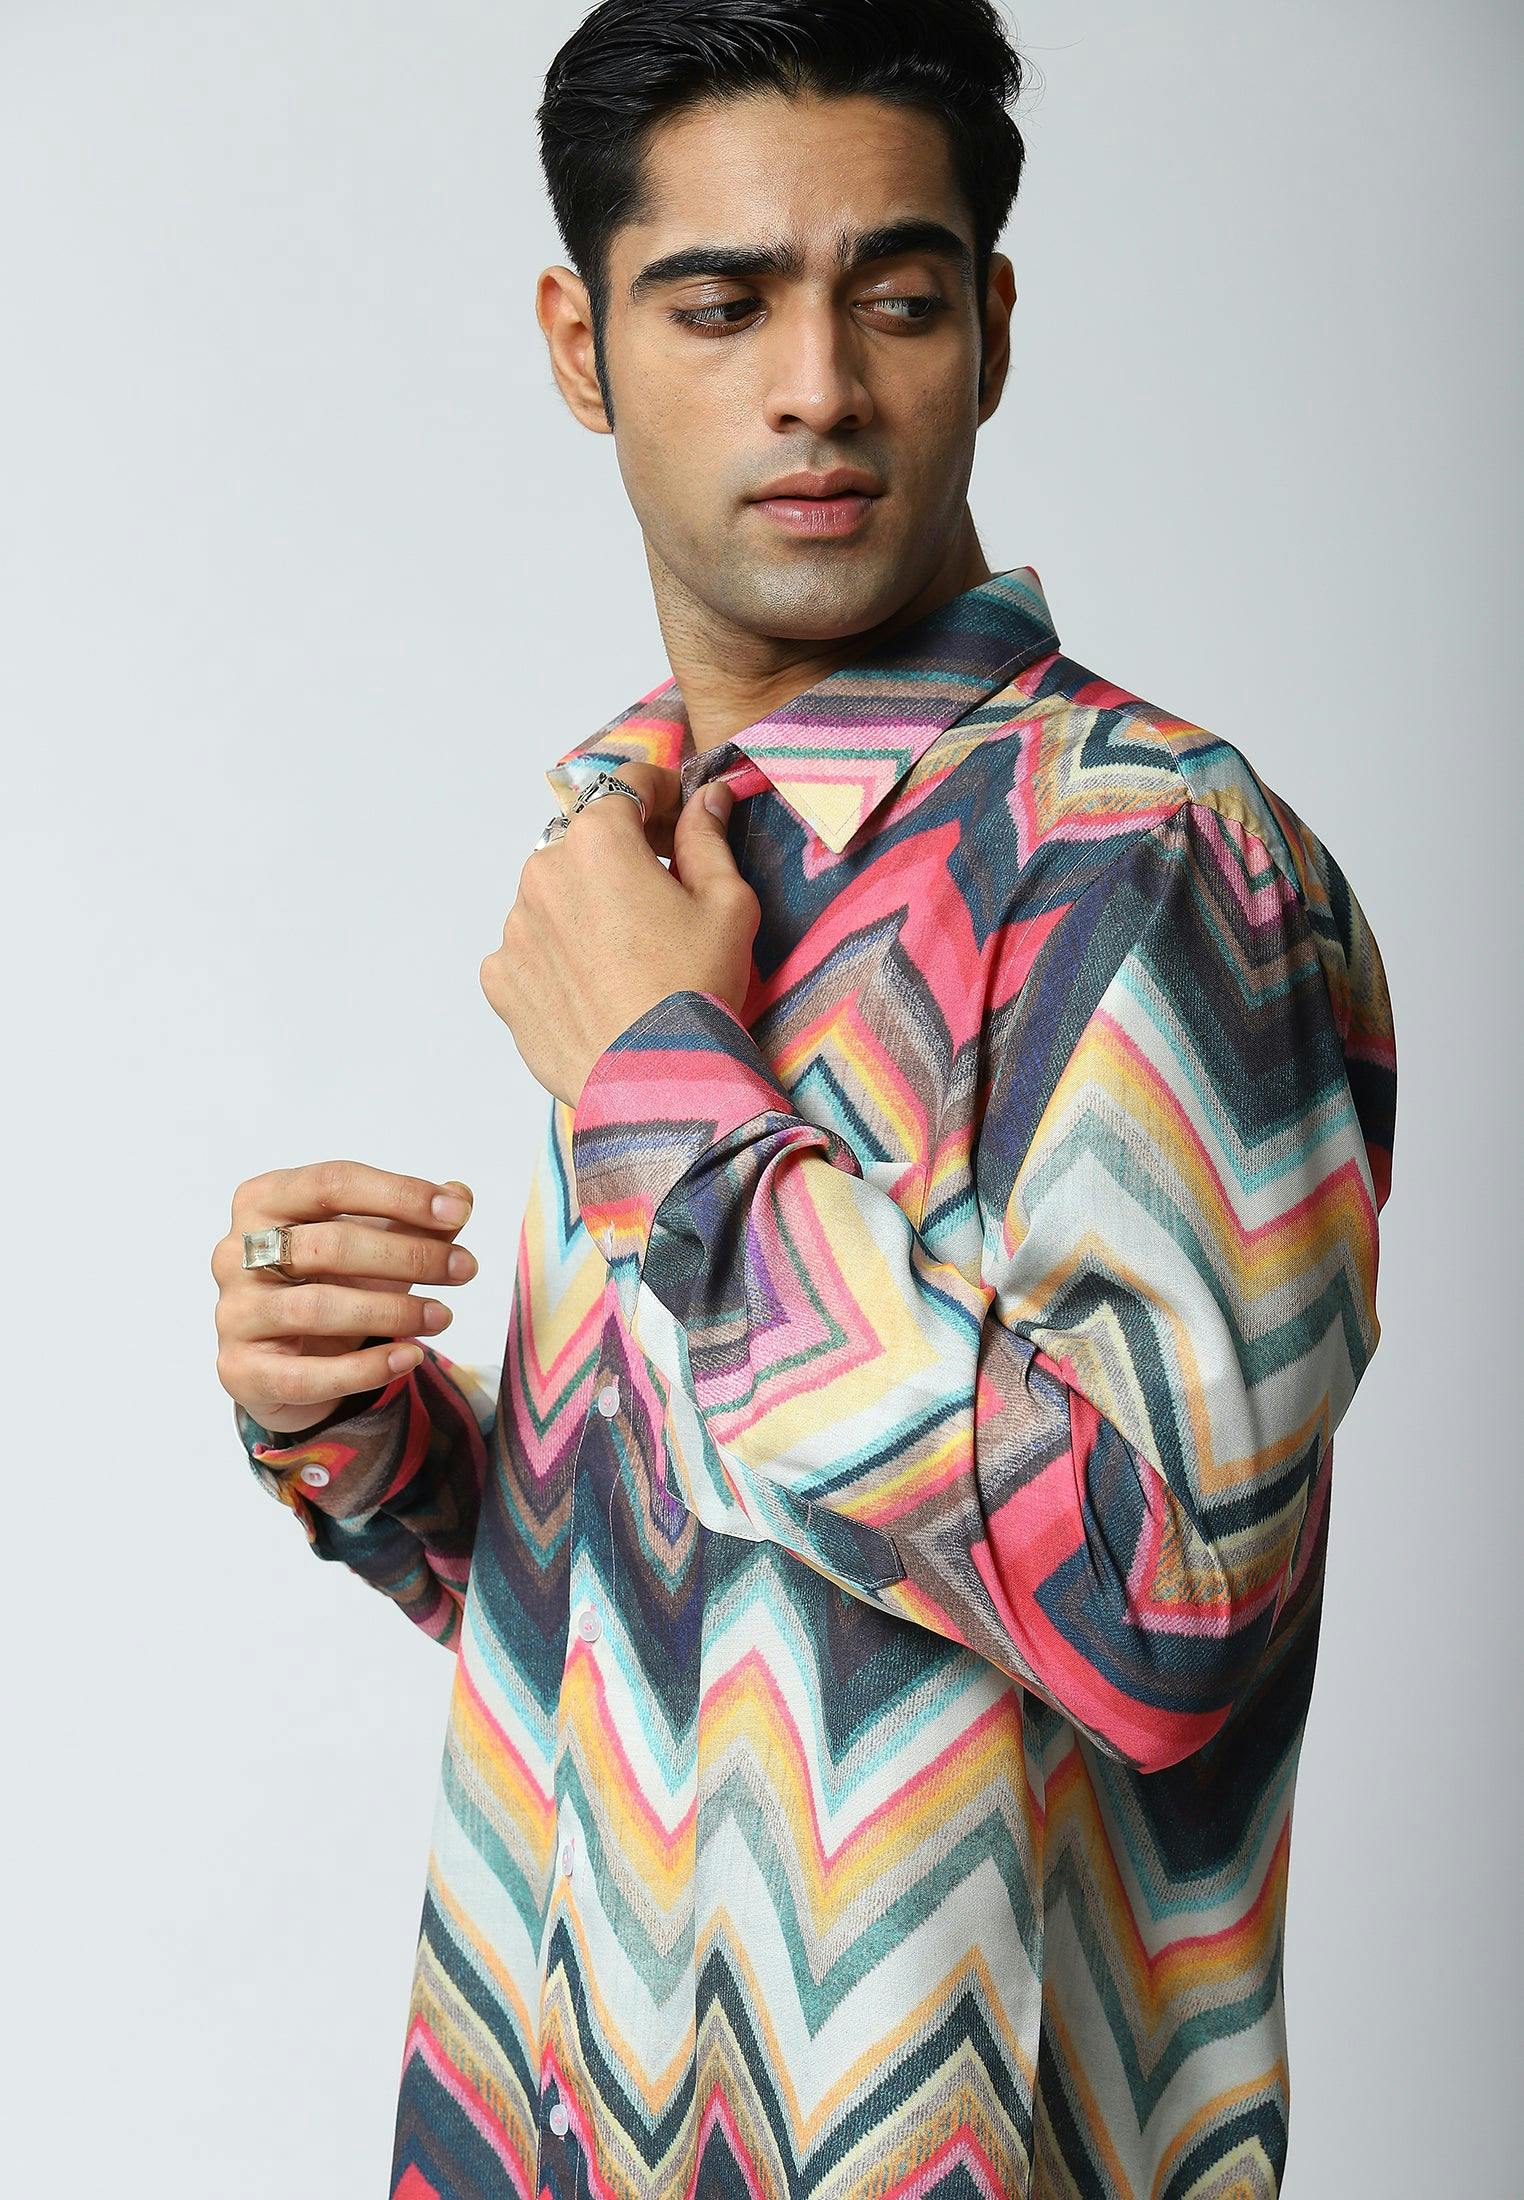 Primary image of 'Omani Mirage' Mens Shirt, a product by Lola's